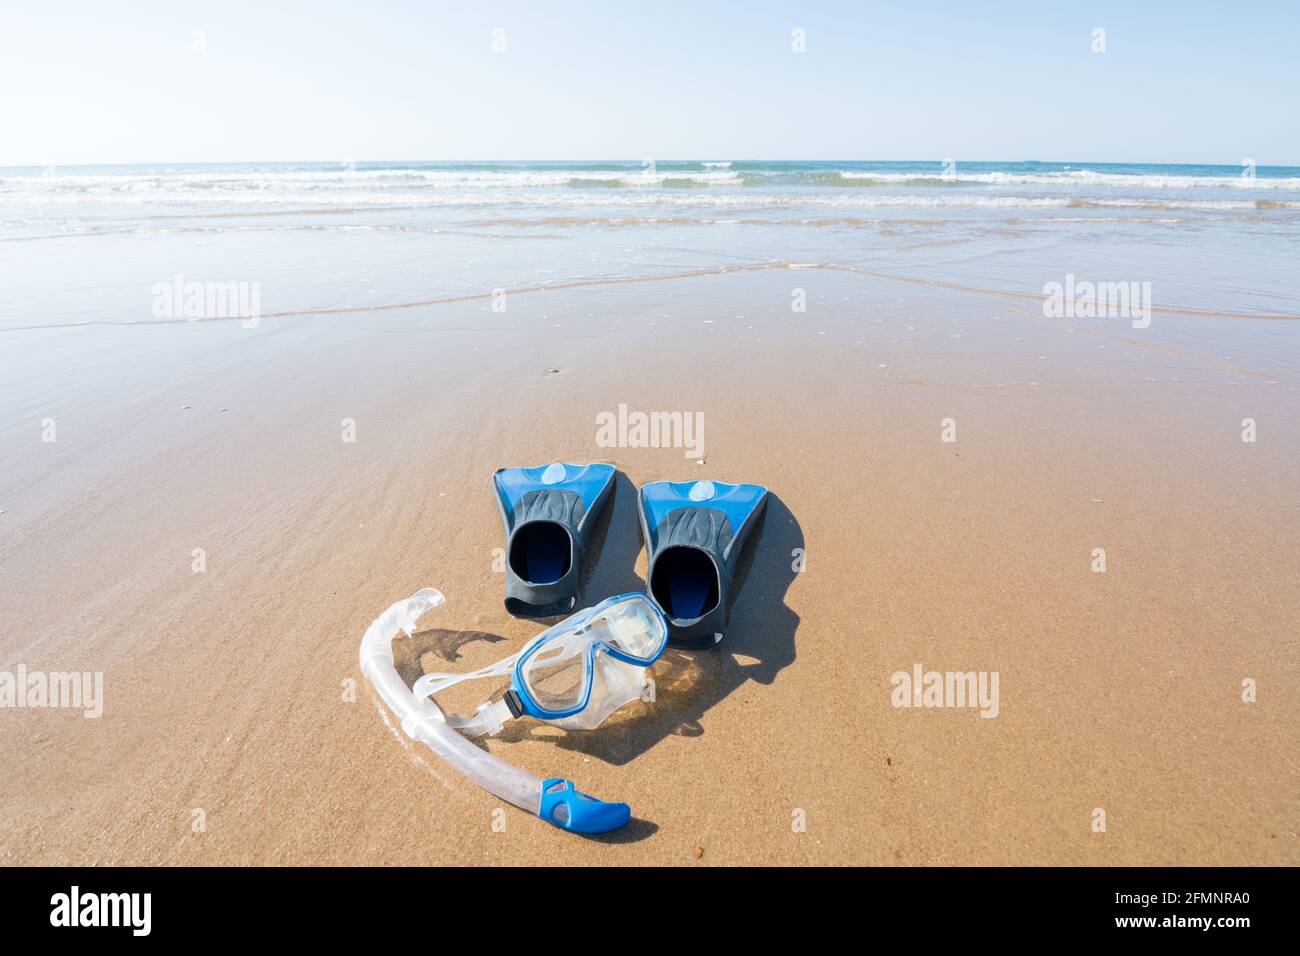 diving and snorkeling equipment on the sand of the beach. fins, mask and snorkel. leisure and water sports concept Stock Photo